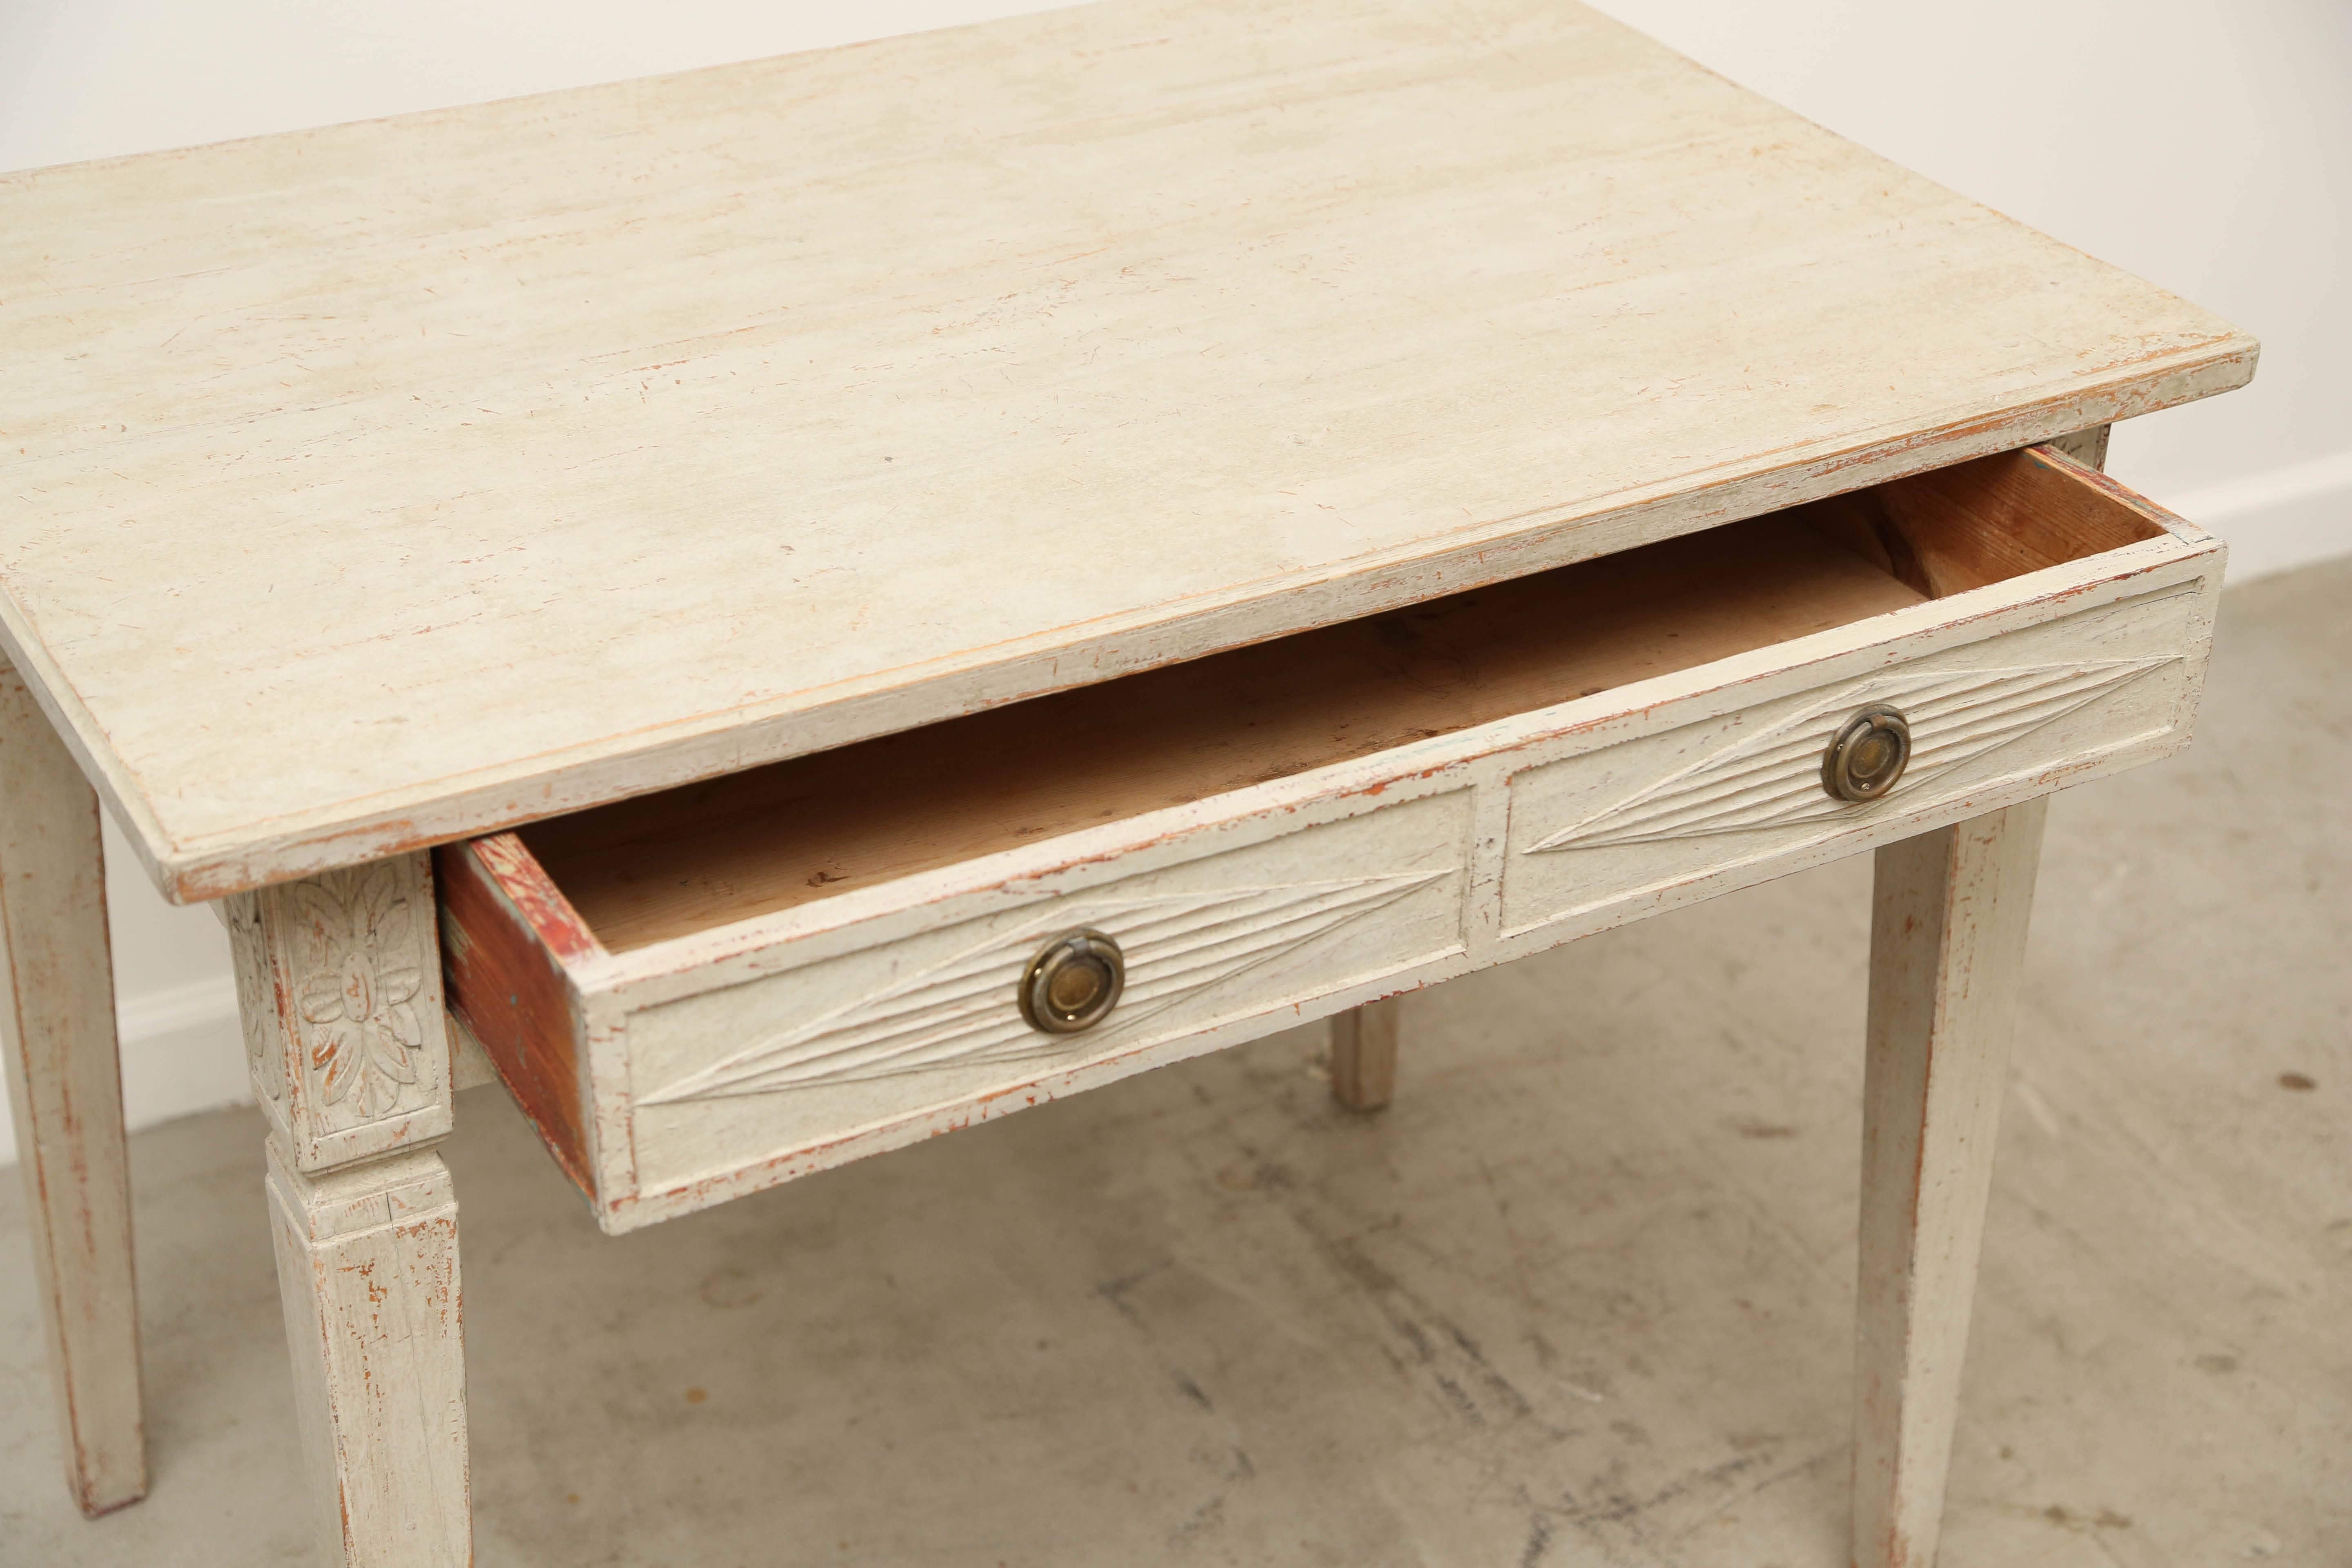 Wood Antique Swedish Gustavian Style Painted Writing Desk, Mid-19th Century For Sale